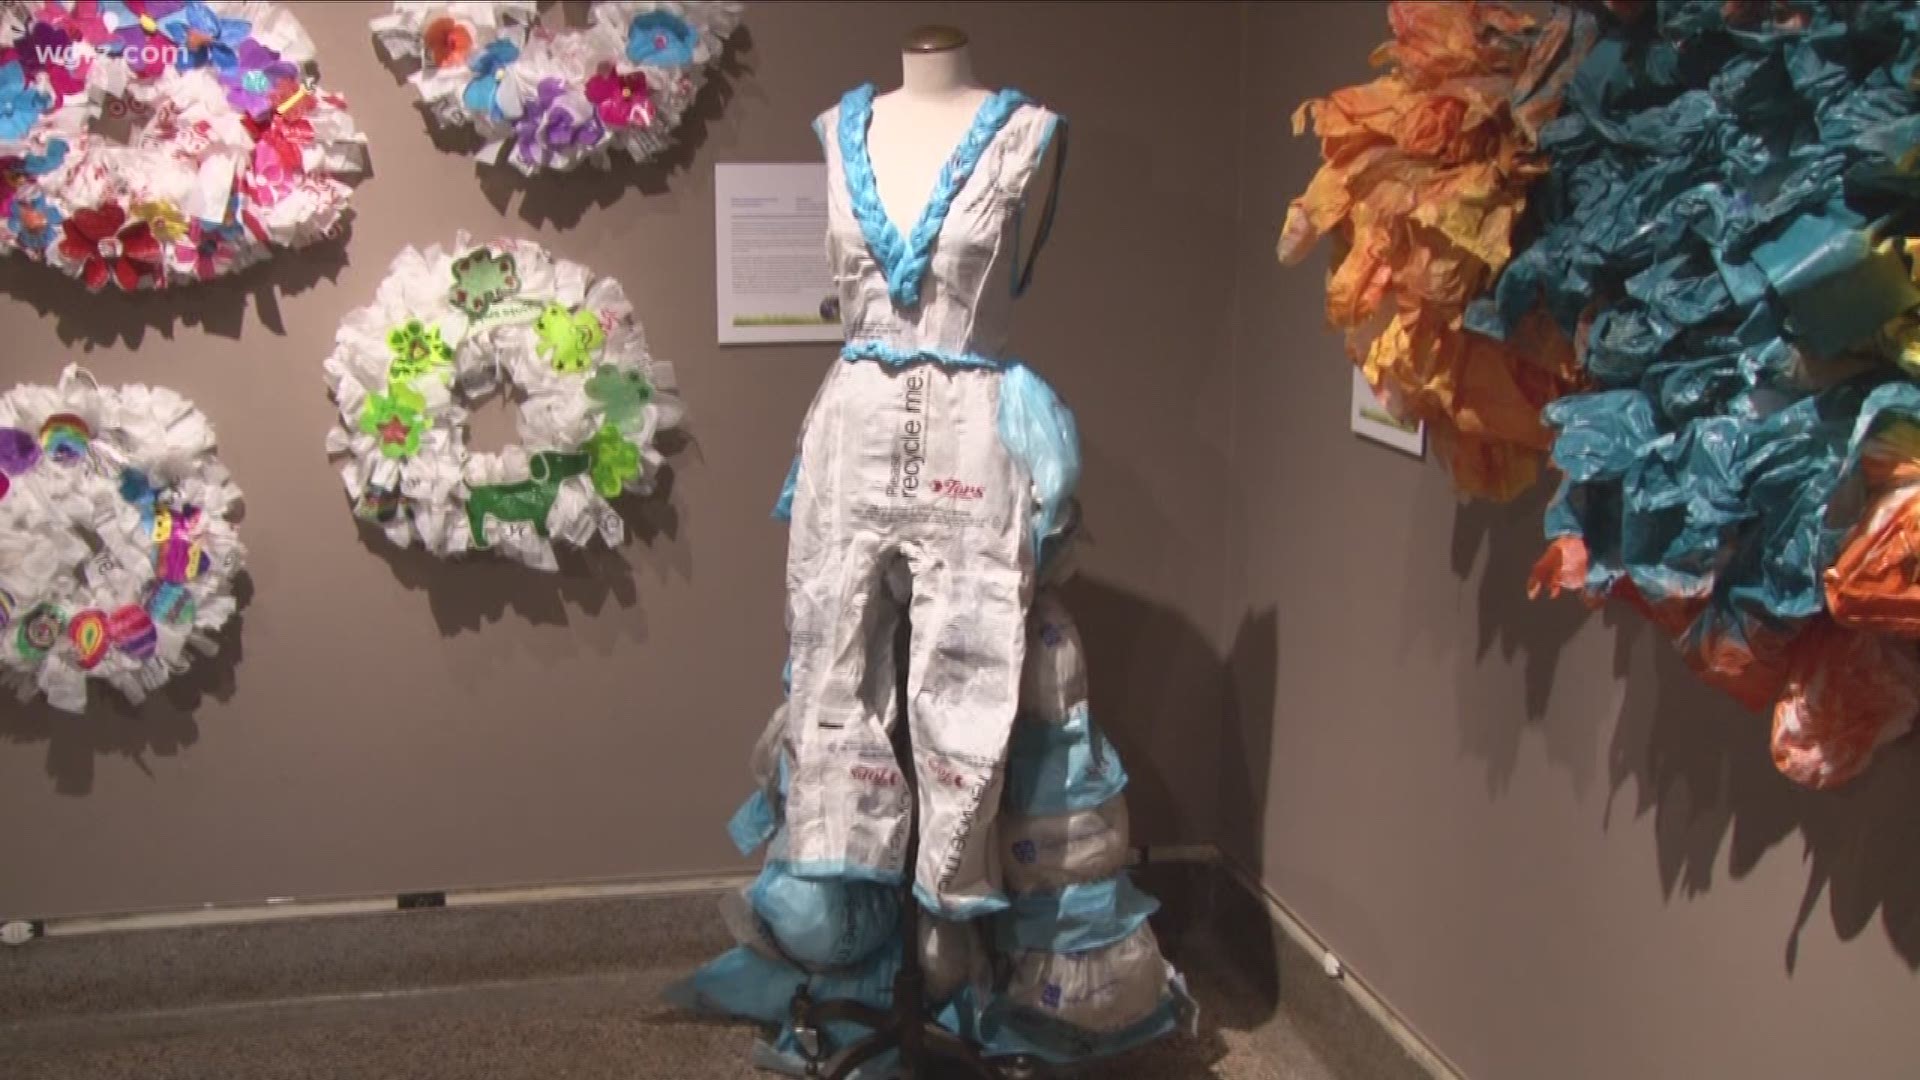 "Pollution Prevention through Art,"  aims to make the connection between litter, storm water and plastic pollution.